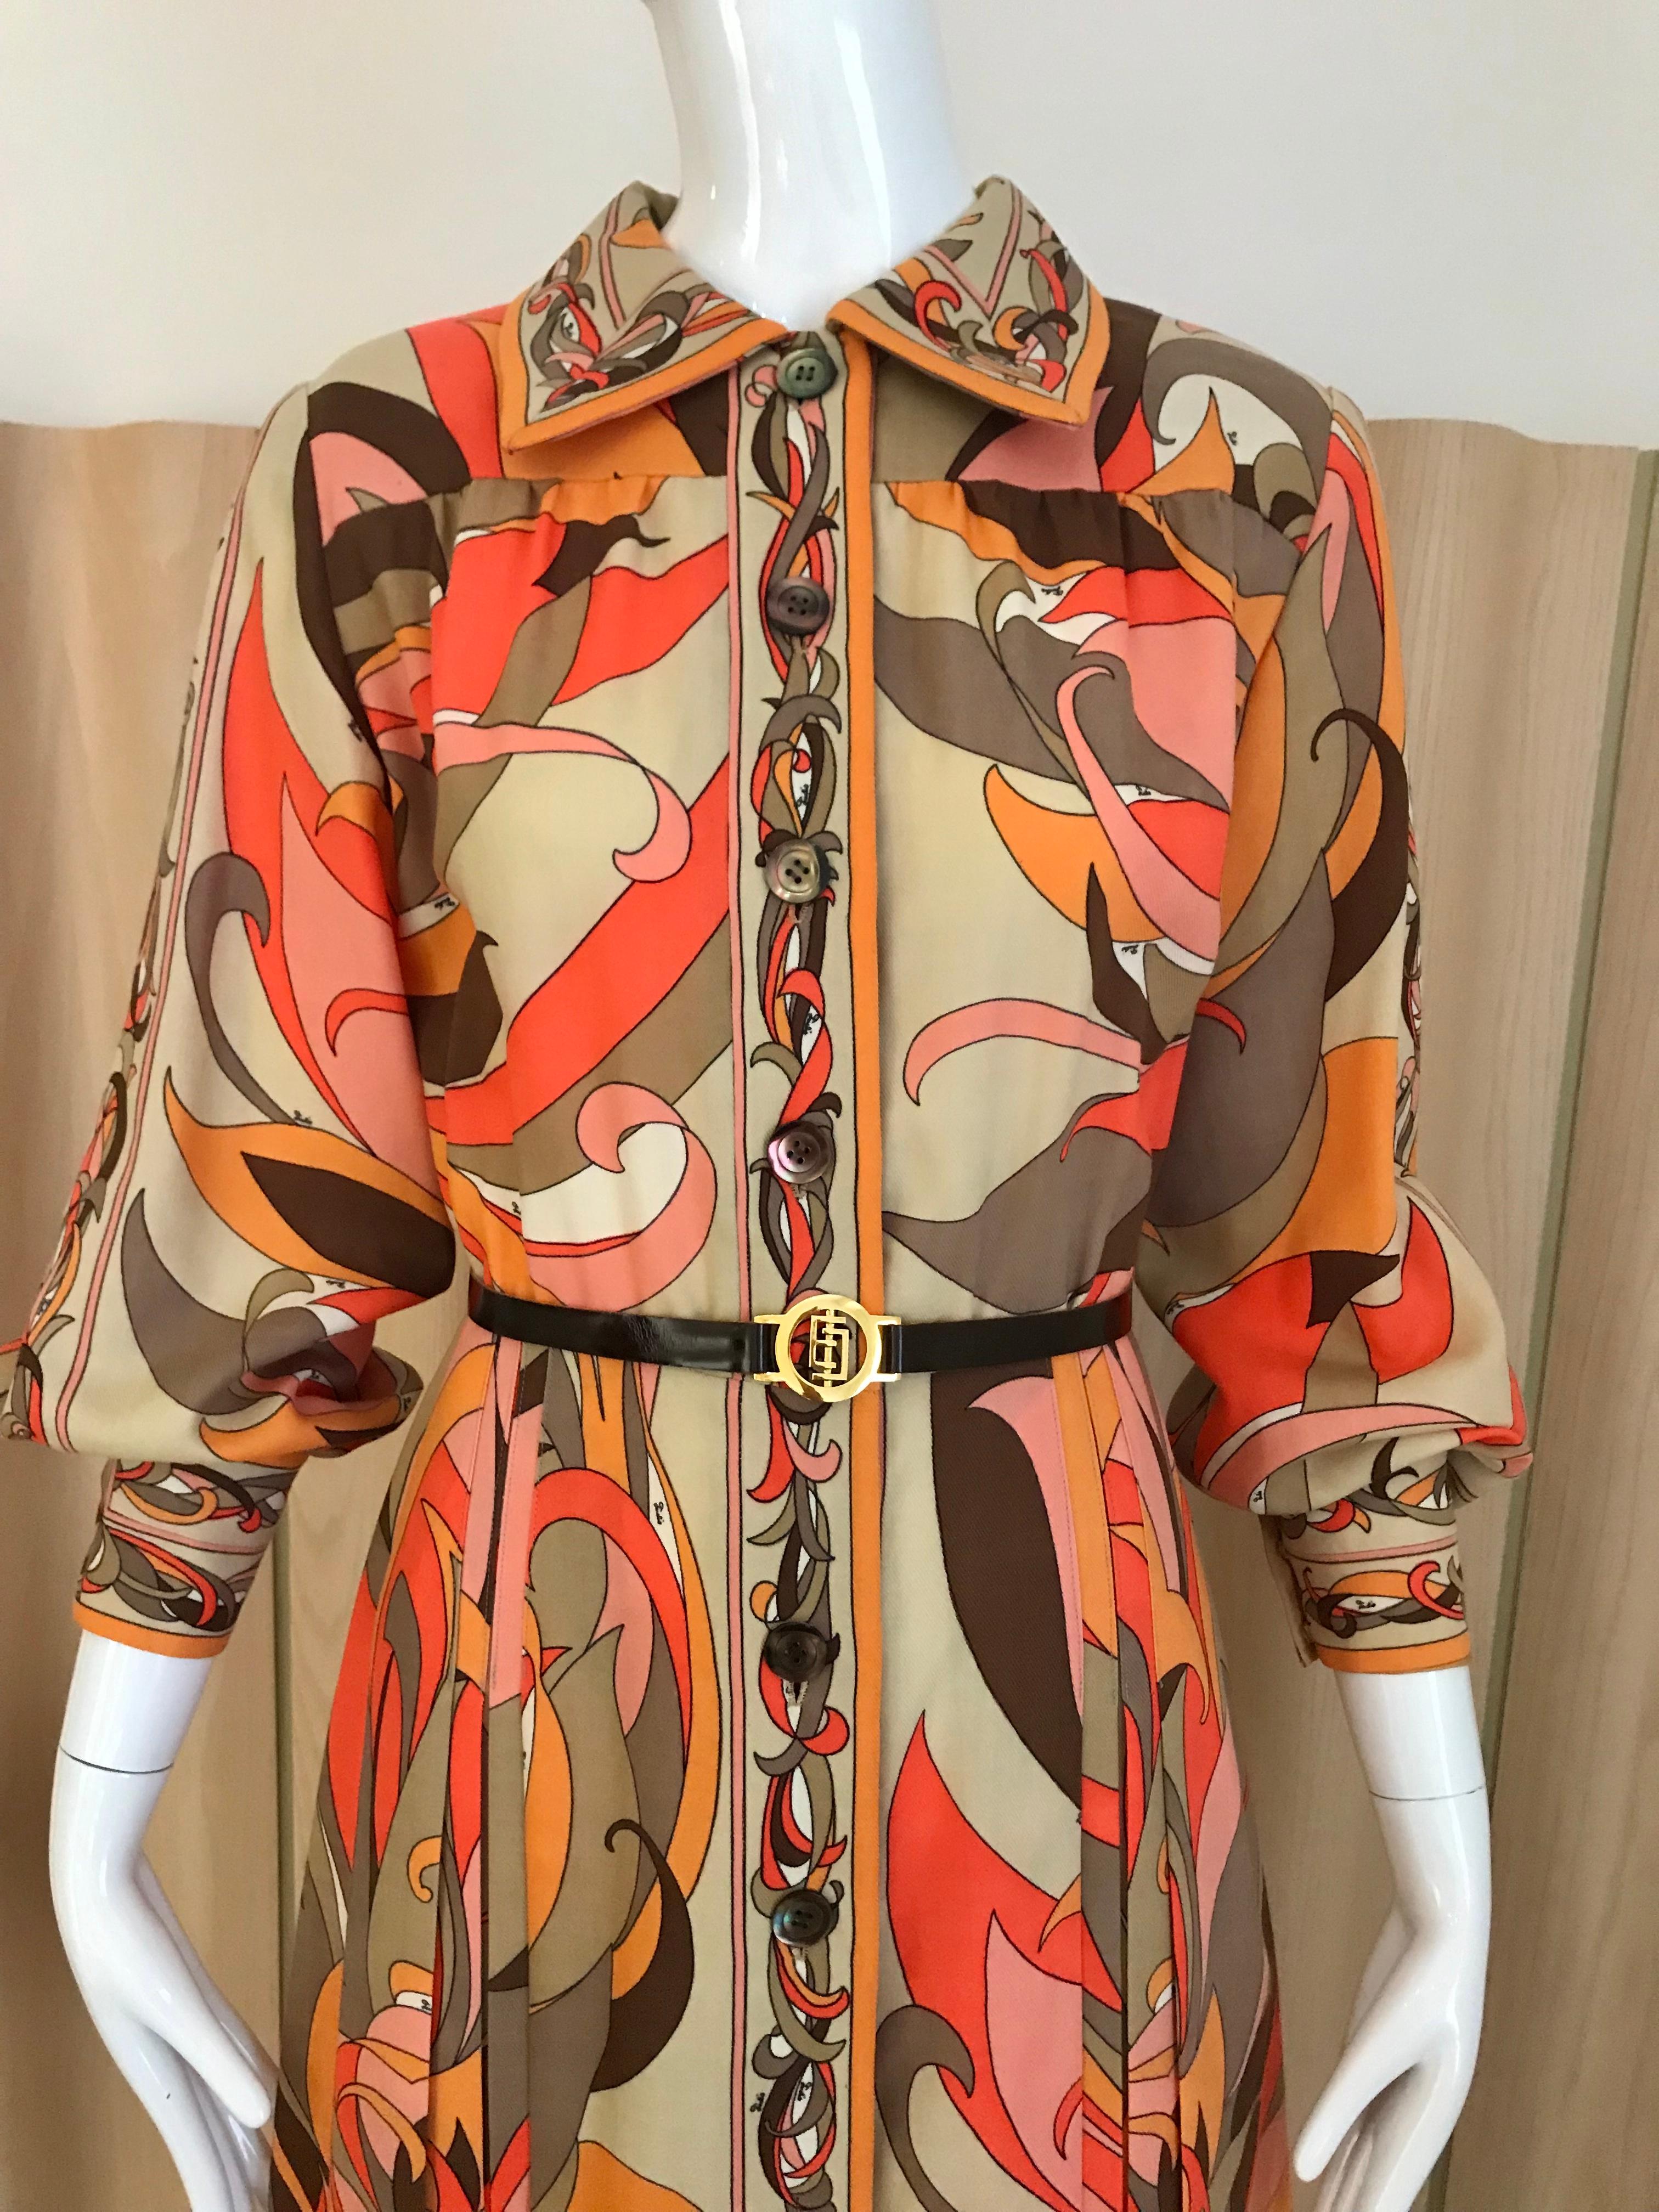 Vintage 1970s Pucci light wool in multi color print in orange, brown, creme and pink.
Dress comes with original belt. Dress is not lined however it is not itchy.
Size: Medium/ US 6

**** There are some minor distressed on the fabric near the label